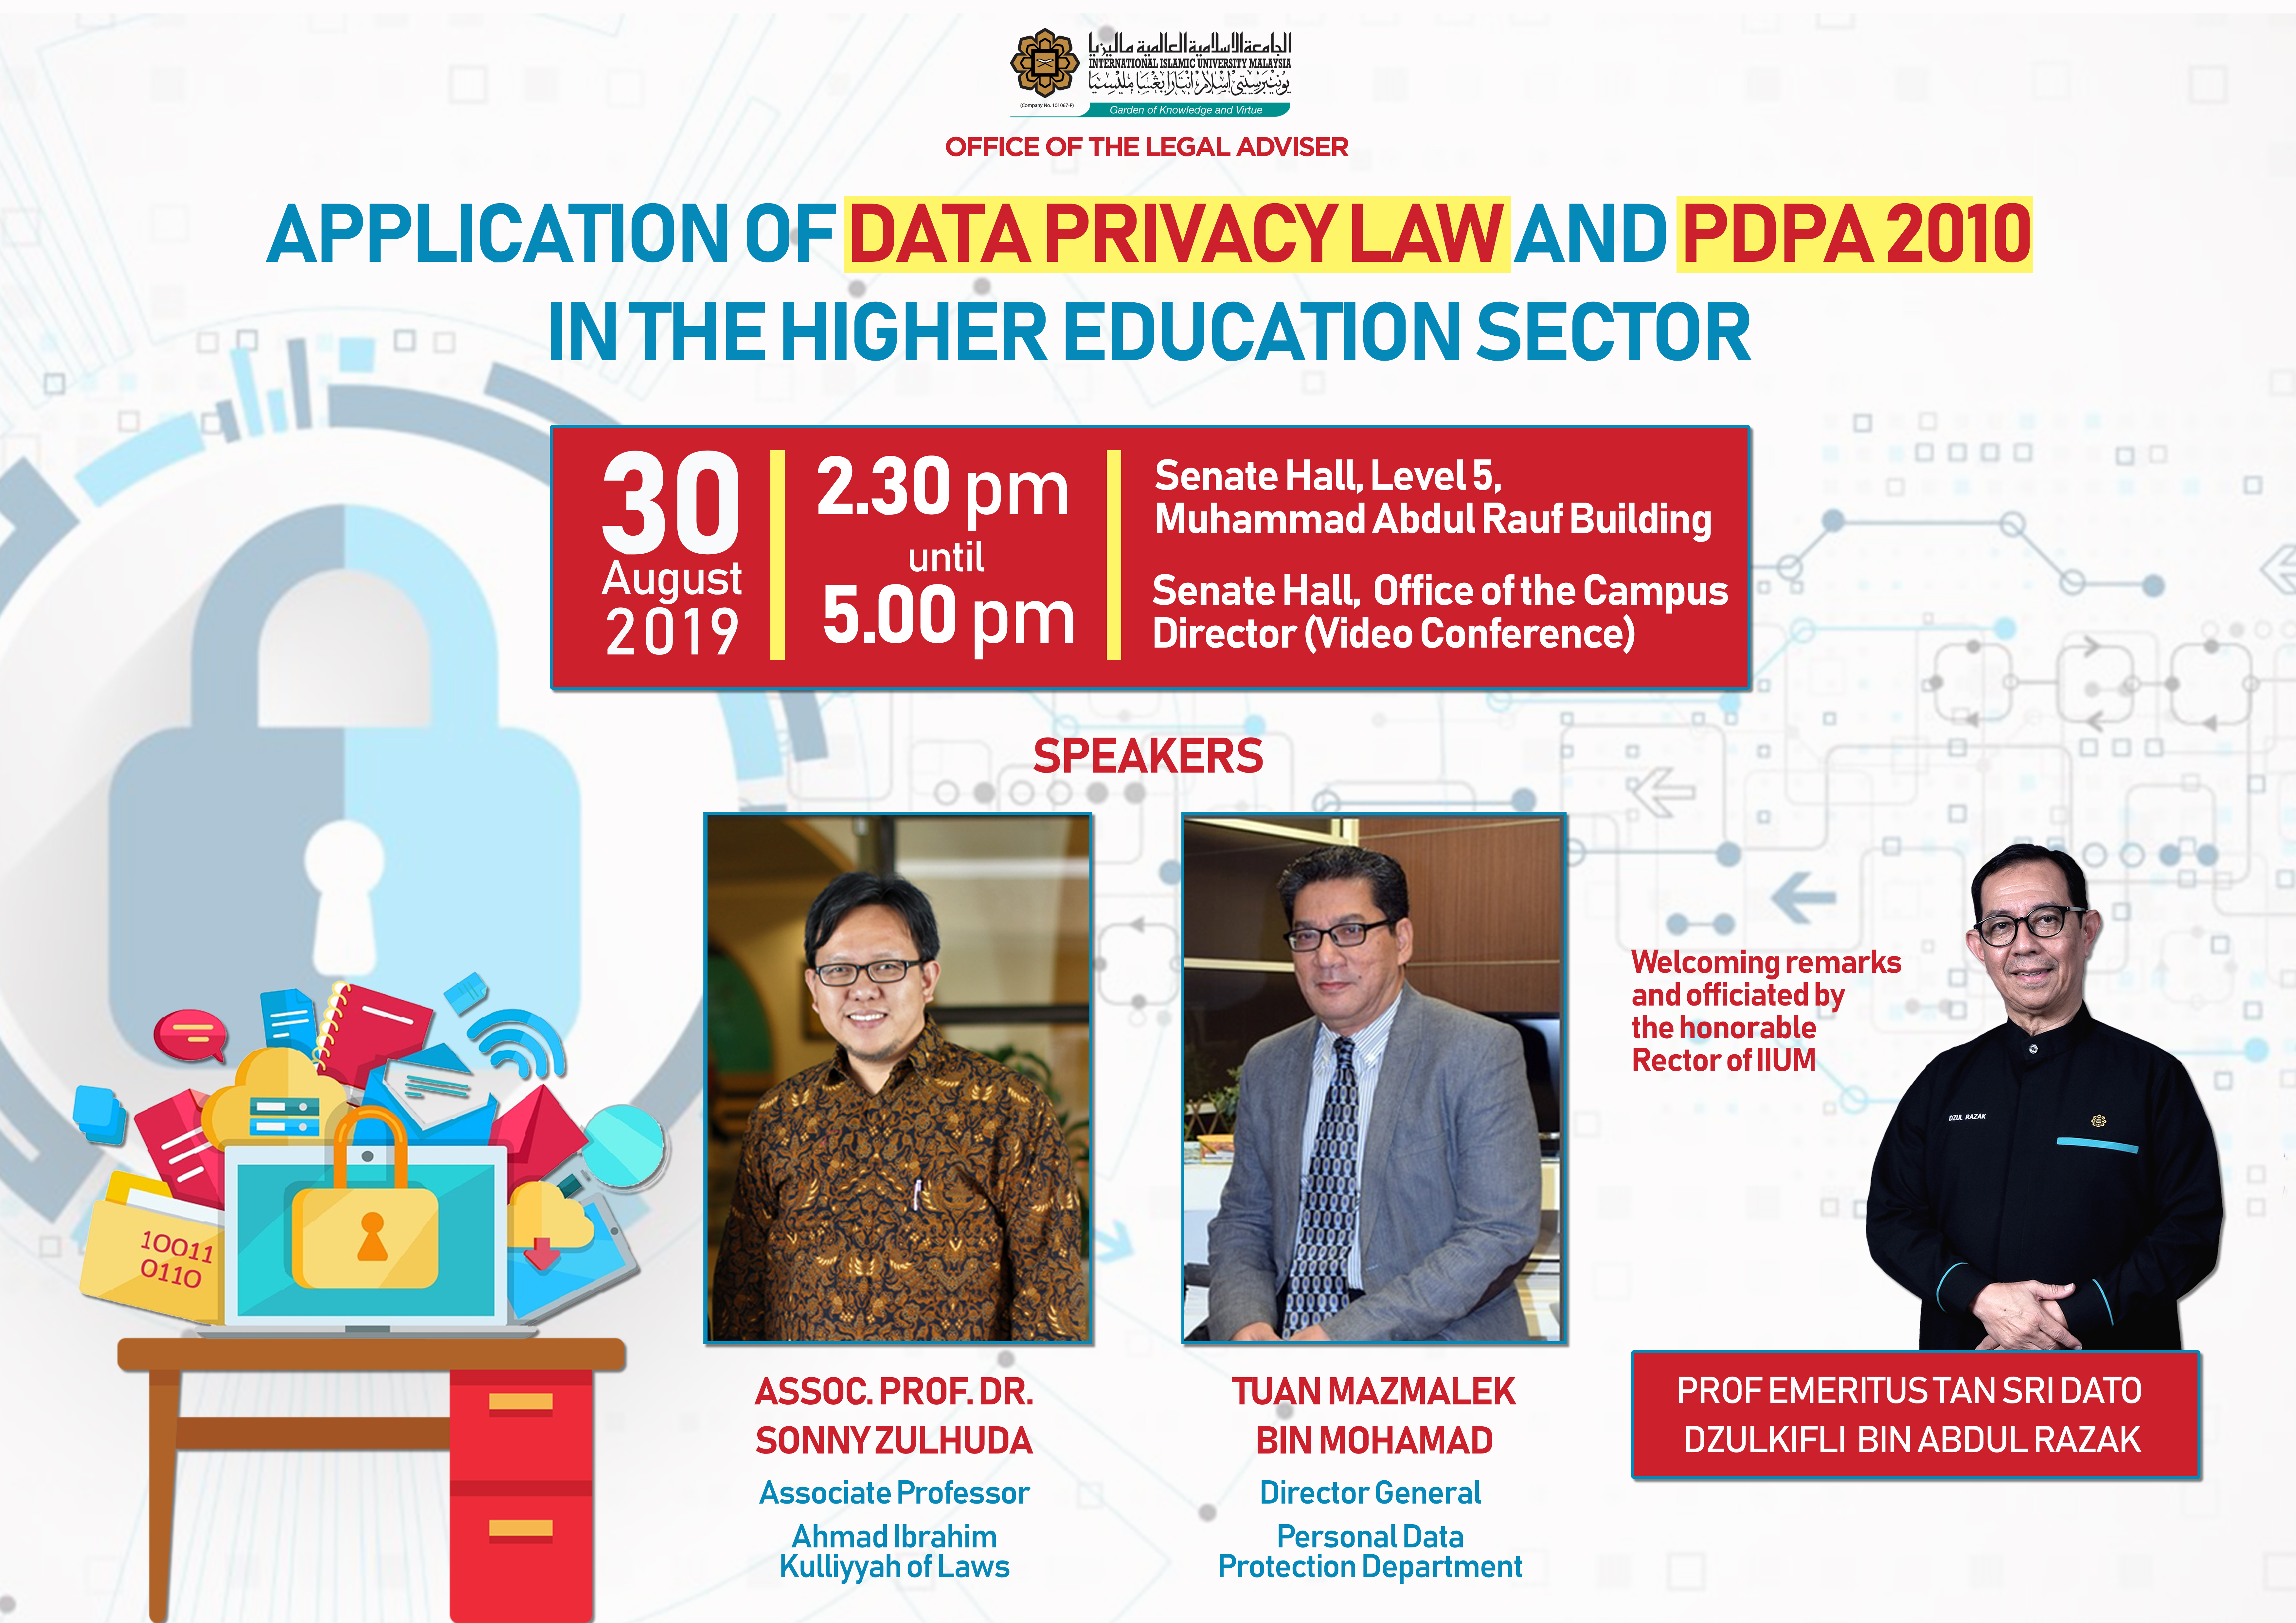 HALF-DAY SEMINAR ON APPLICATION OF DATA PRIVACY LAW AND PDPA 2010 IN HIGHER EDUCATION SECTOR